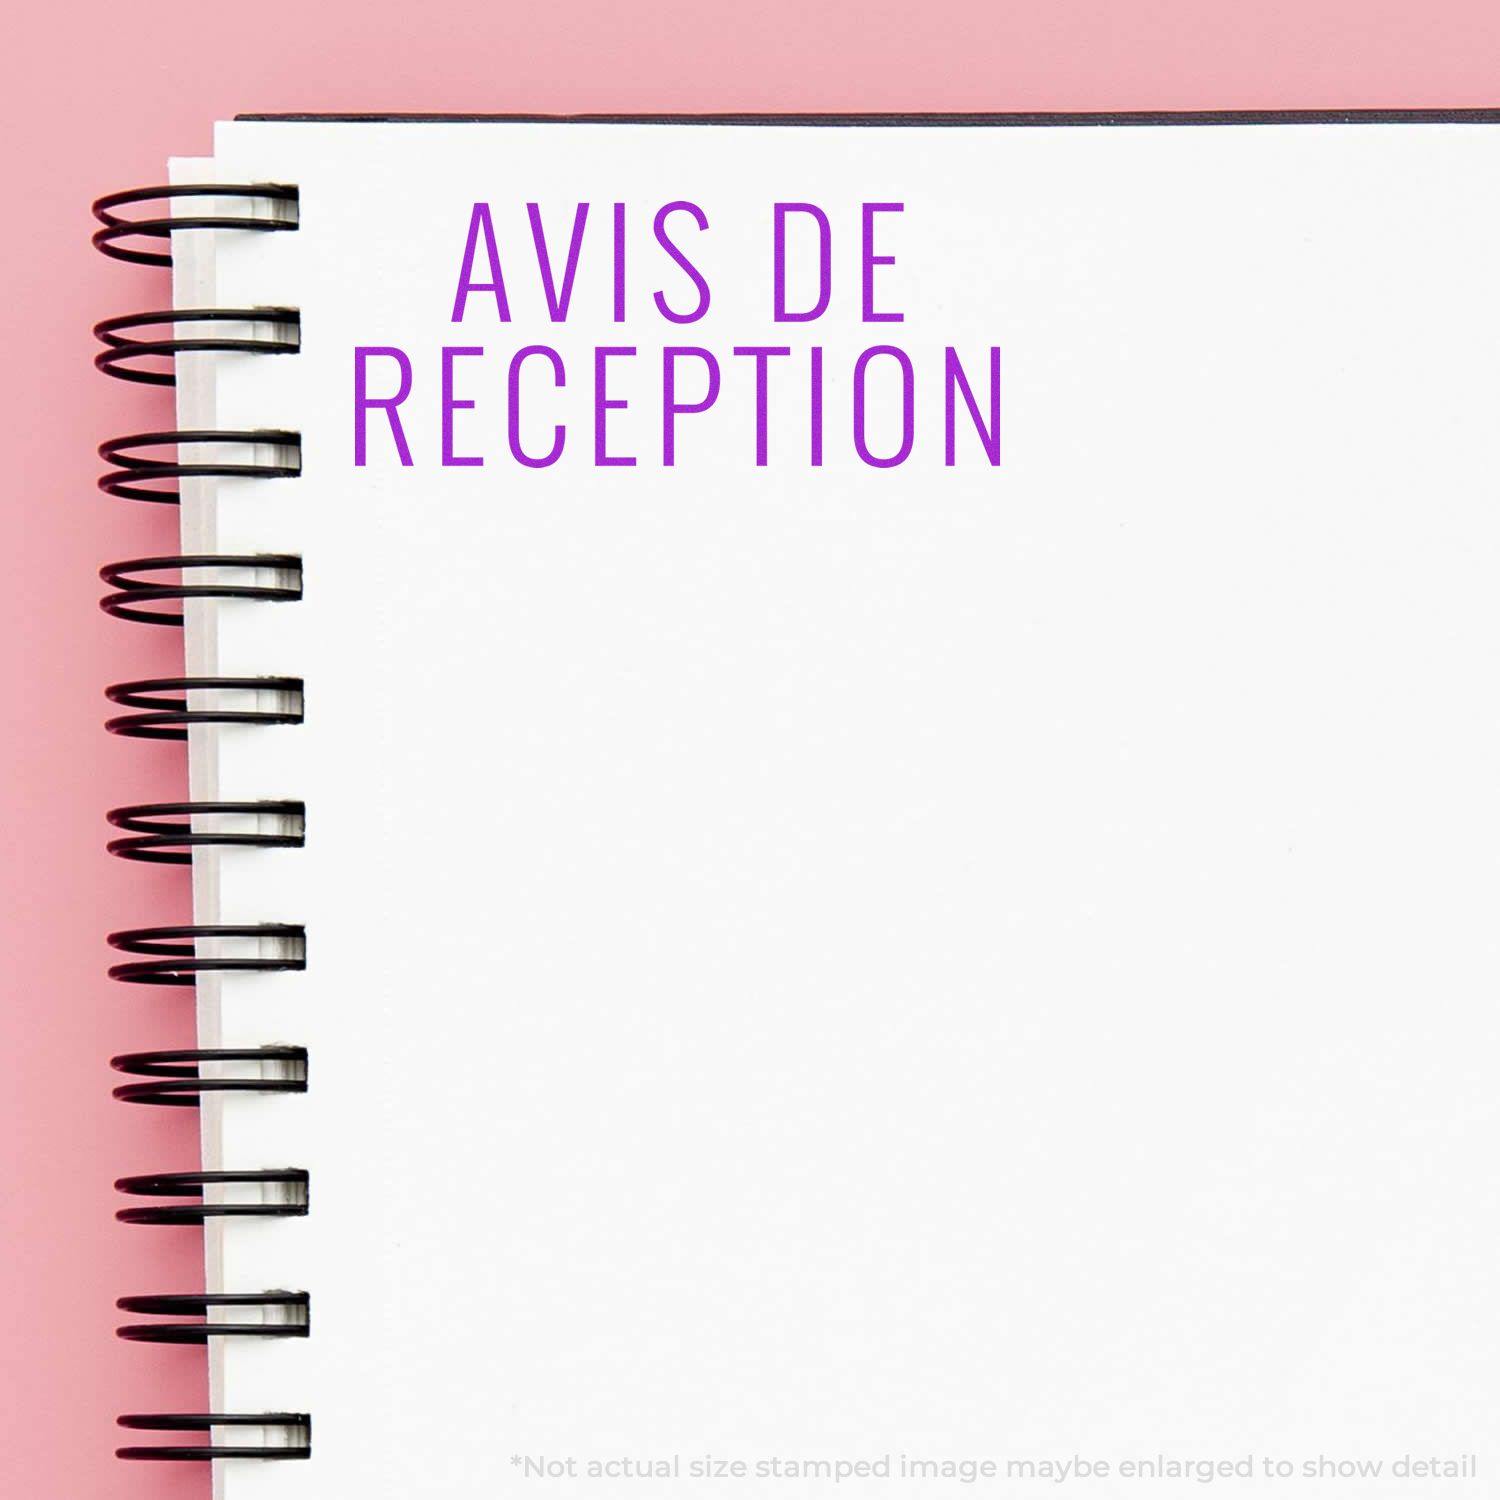 A stock office pre-inked stamp with a stamped image showing how the text "AVIS DE RECEPTION" is displayed after stamping.